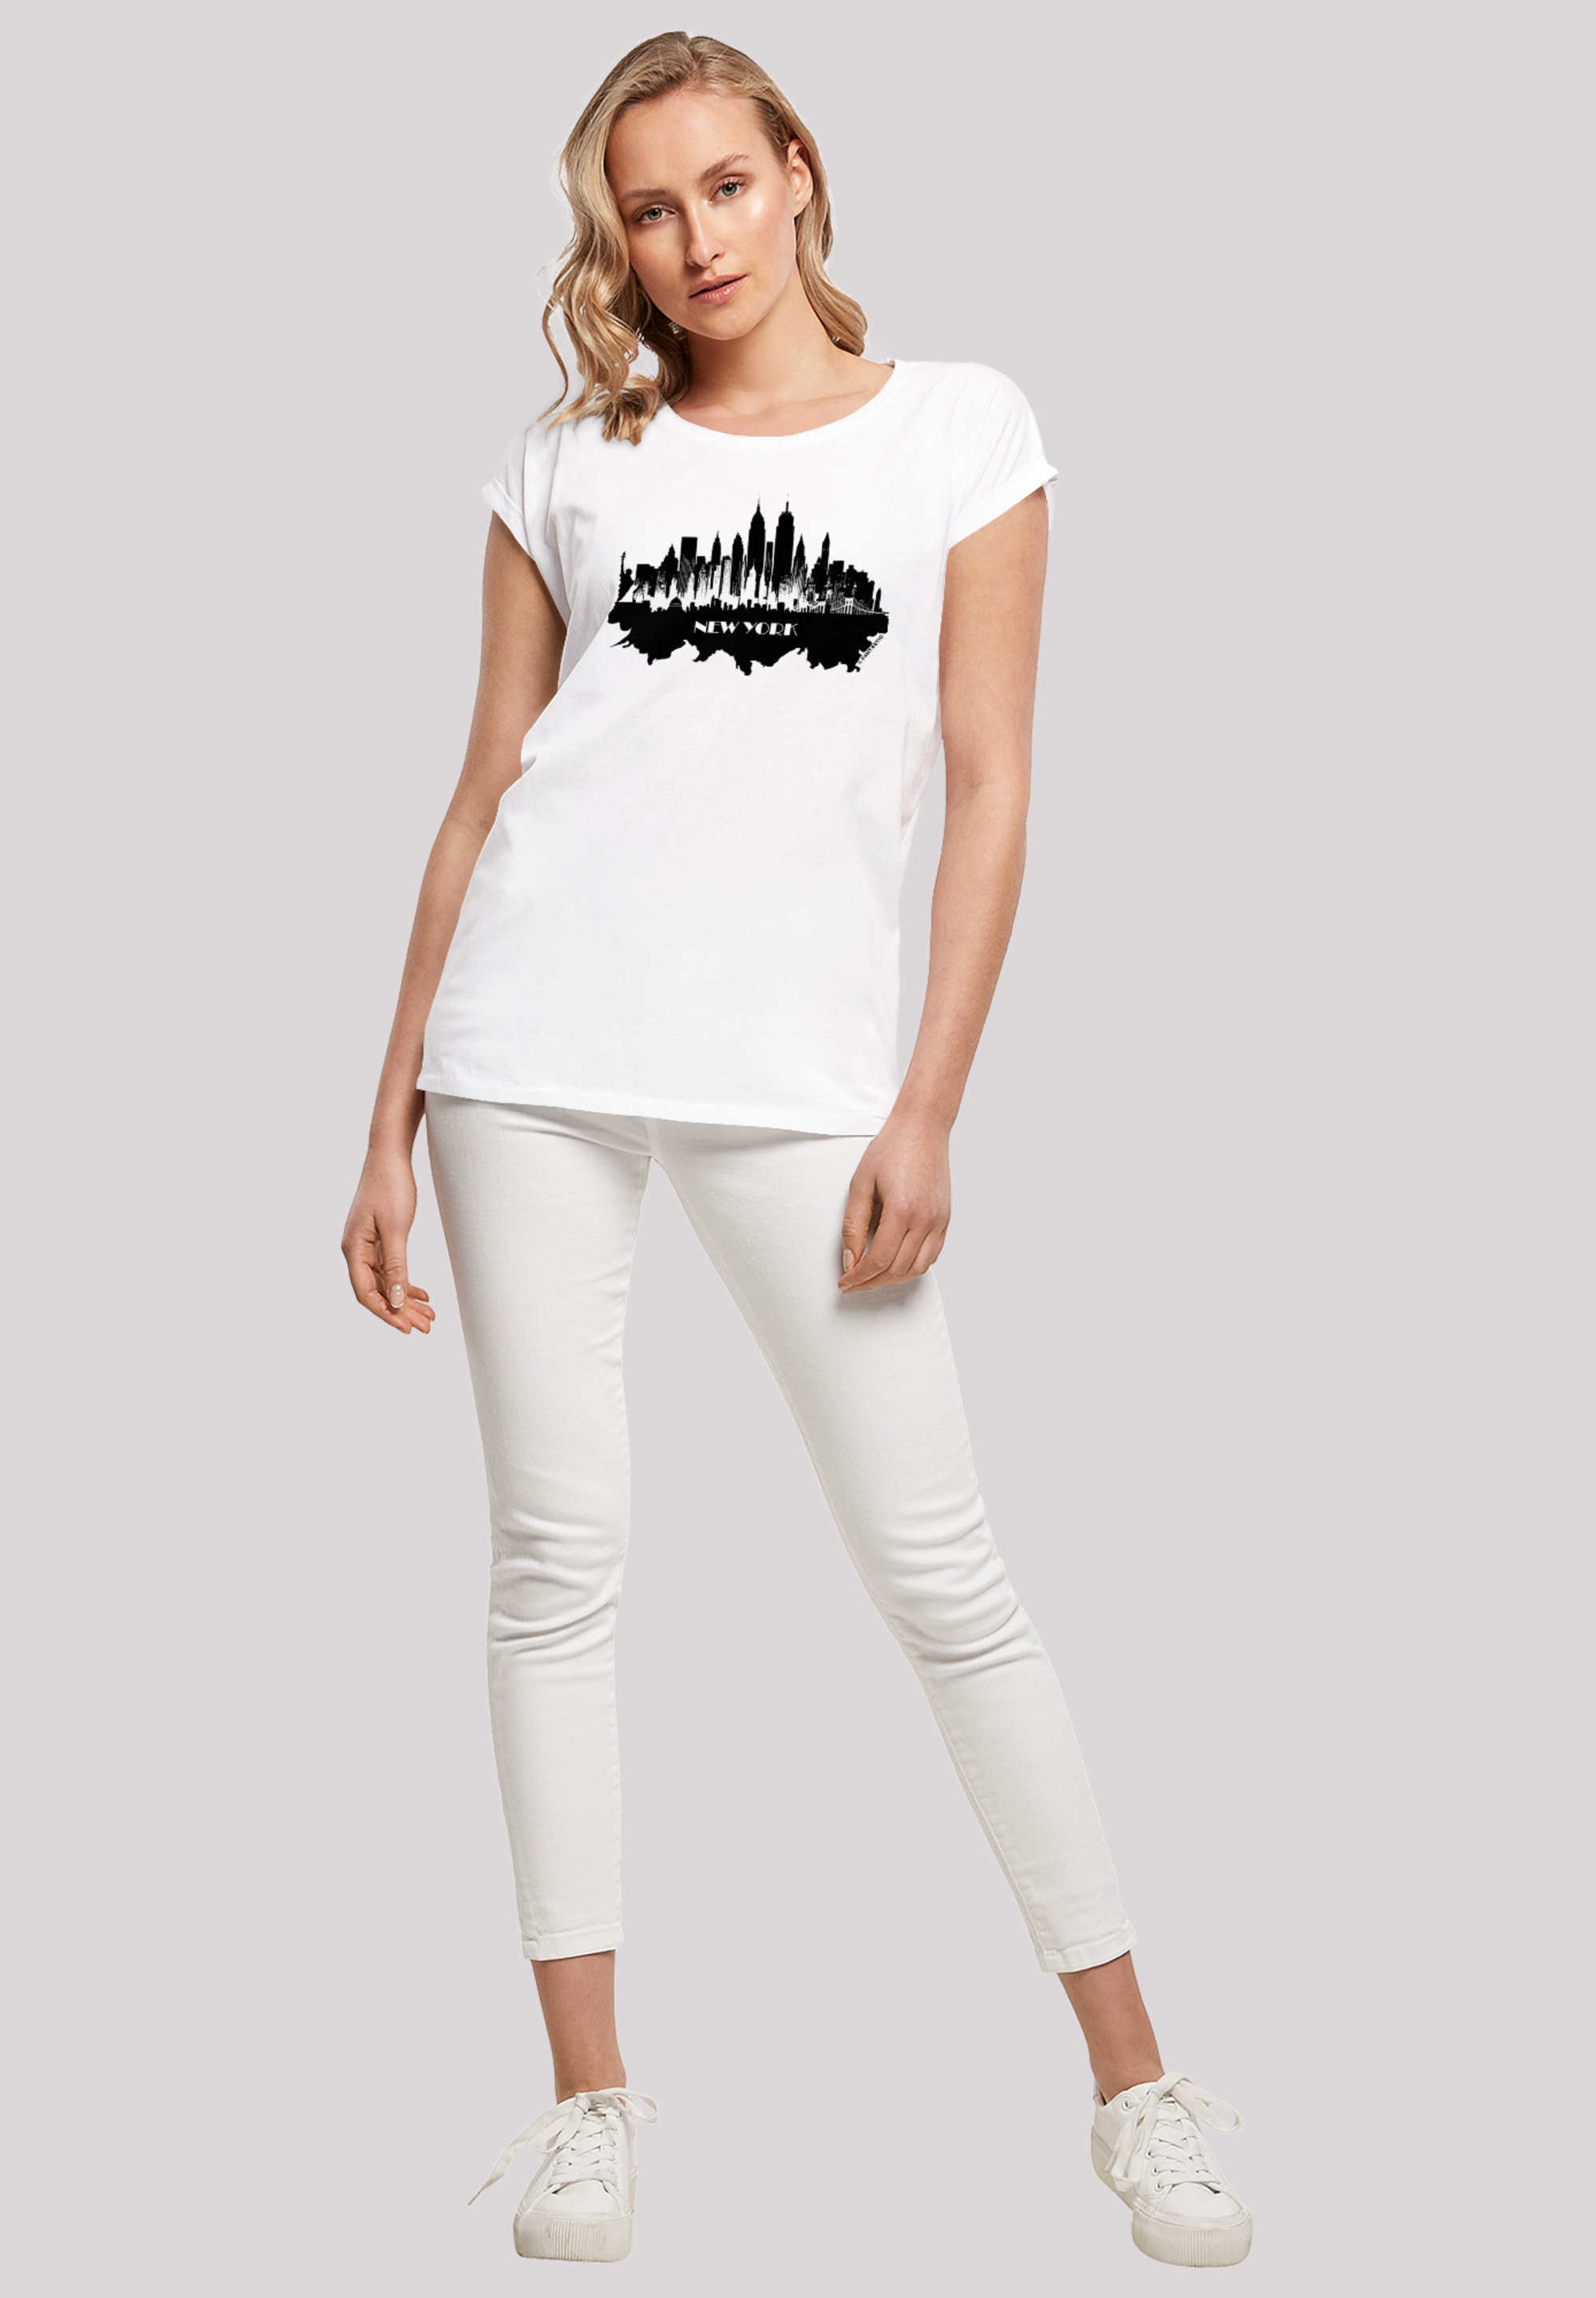 F4NT4STIC T-Shirt »Cities Collection - New York skyline«, Print